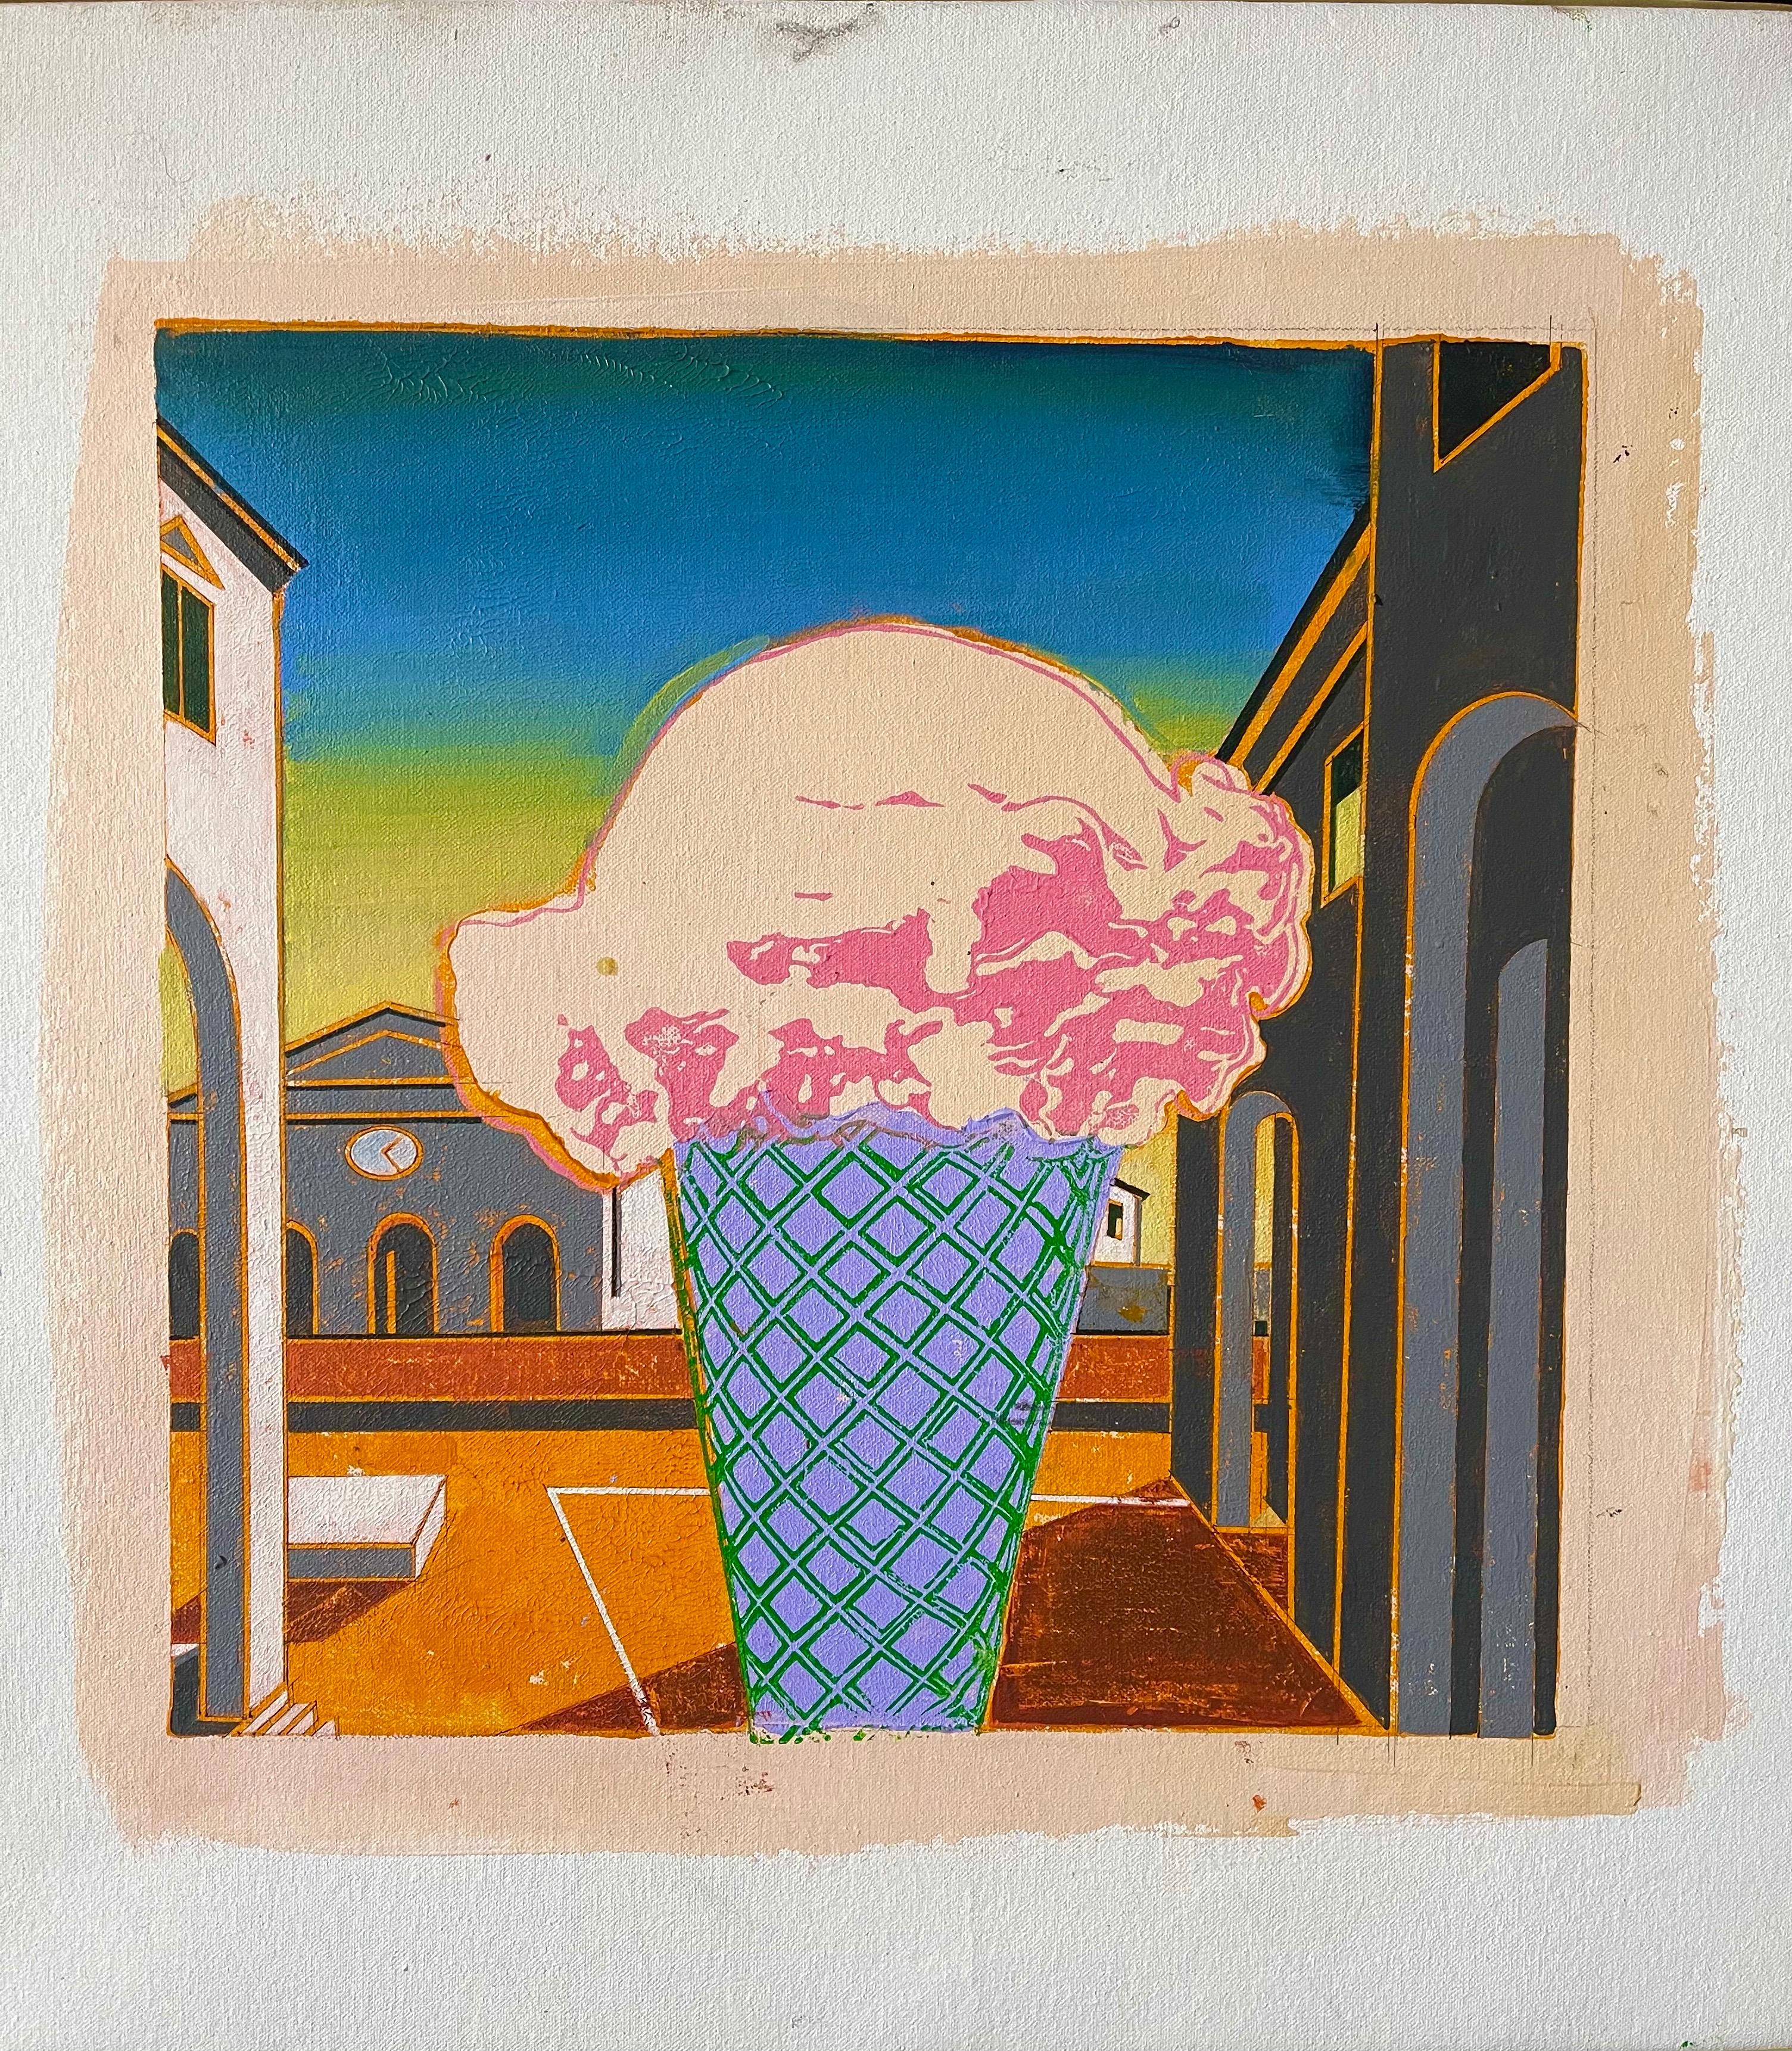 Paul A. Giovanopoulos 
Oil paintings on canvas 
Measures approx. 23 X 23 overall including thin frame.
This one depicts an ice cream done in a photo realism pop art style super imposed over a surrealist Giorgio di Chirico Surrealist Painting.
This